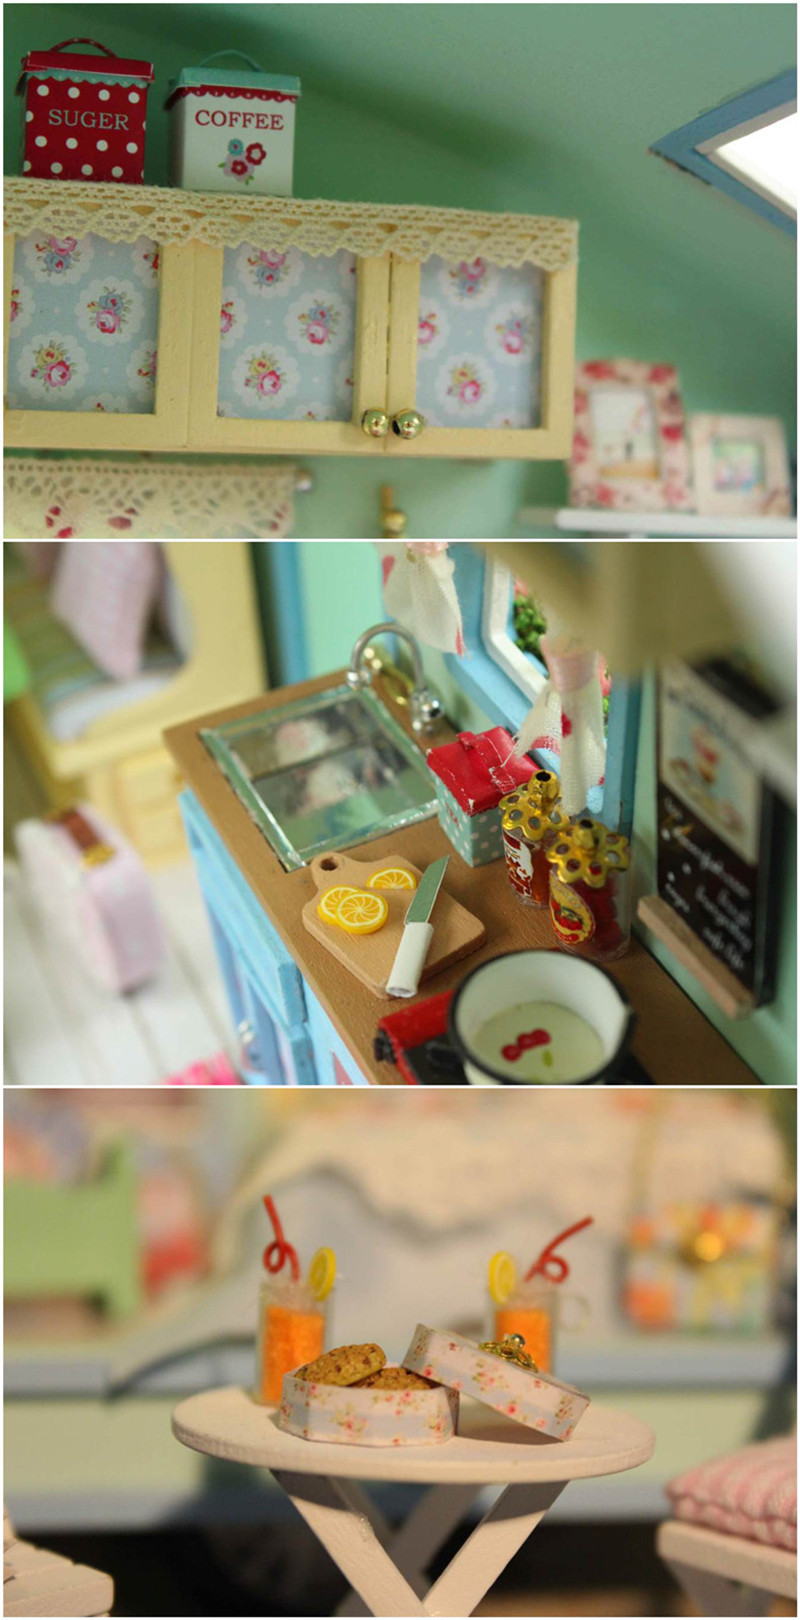 CuteRoom-A-016-Time-Travel-DIY-Wooden-Dollhouse-Miniature-Kit-Doll-house-LED-Music-Voice-Control-1032415-5